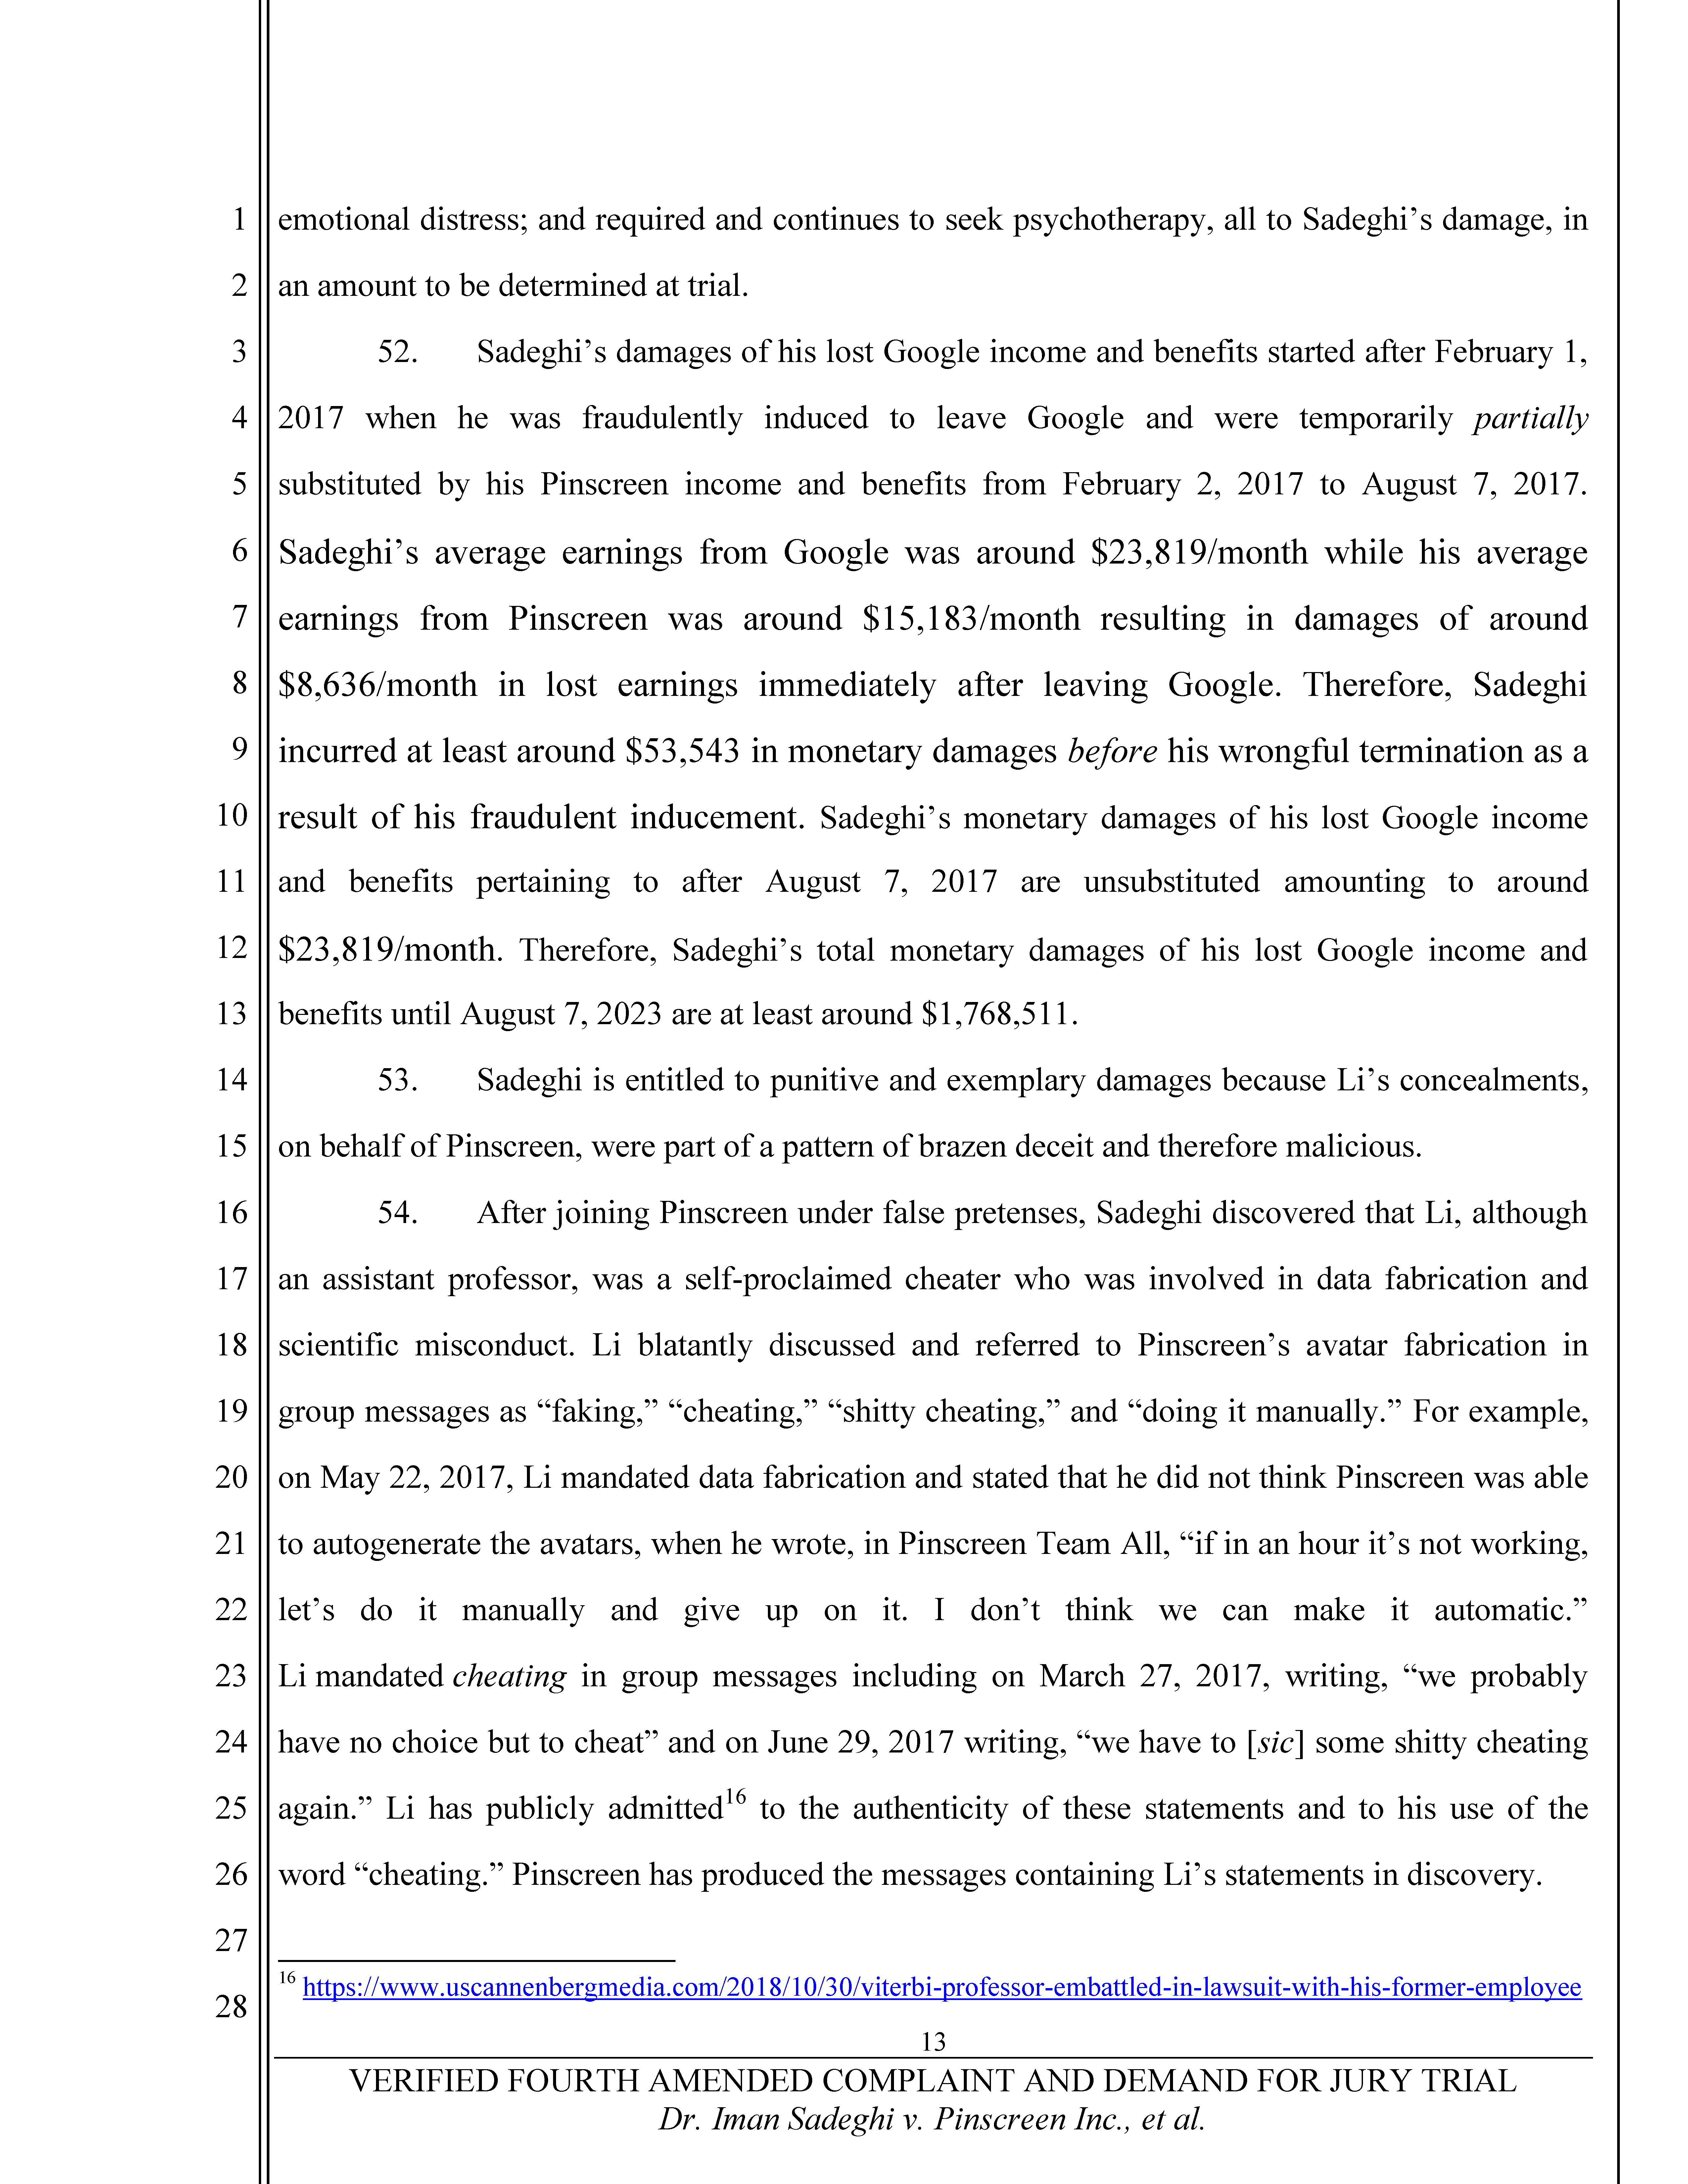 Fourth Amended Complaint (4AC) Page 14